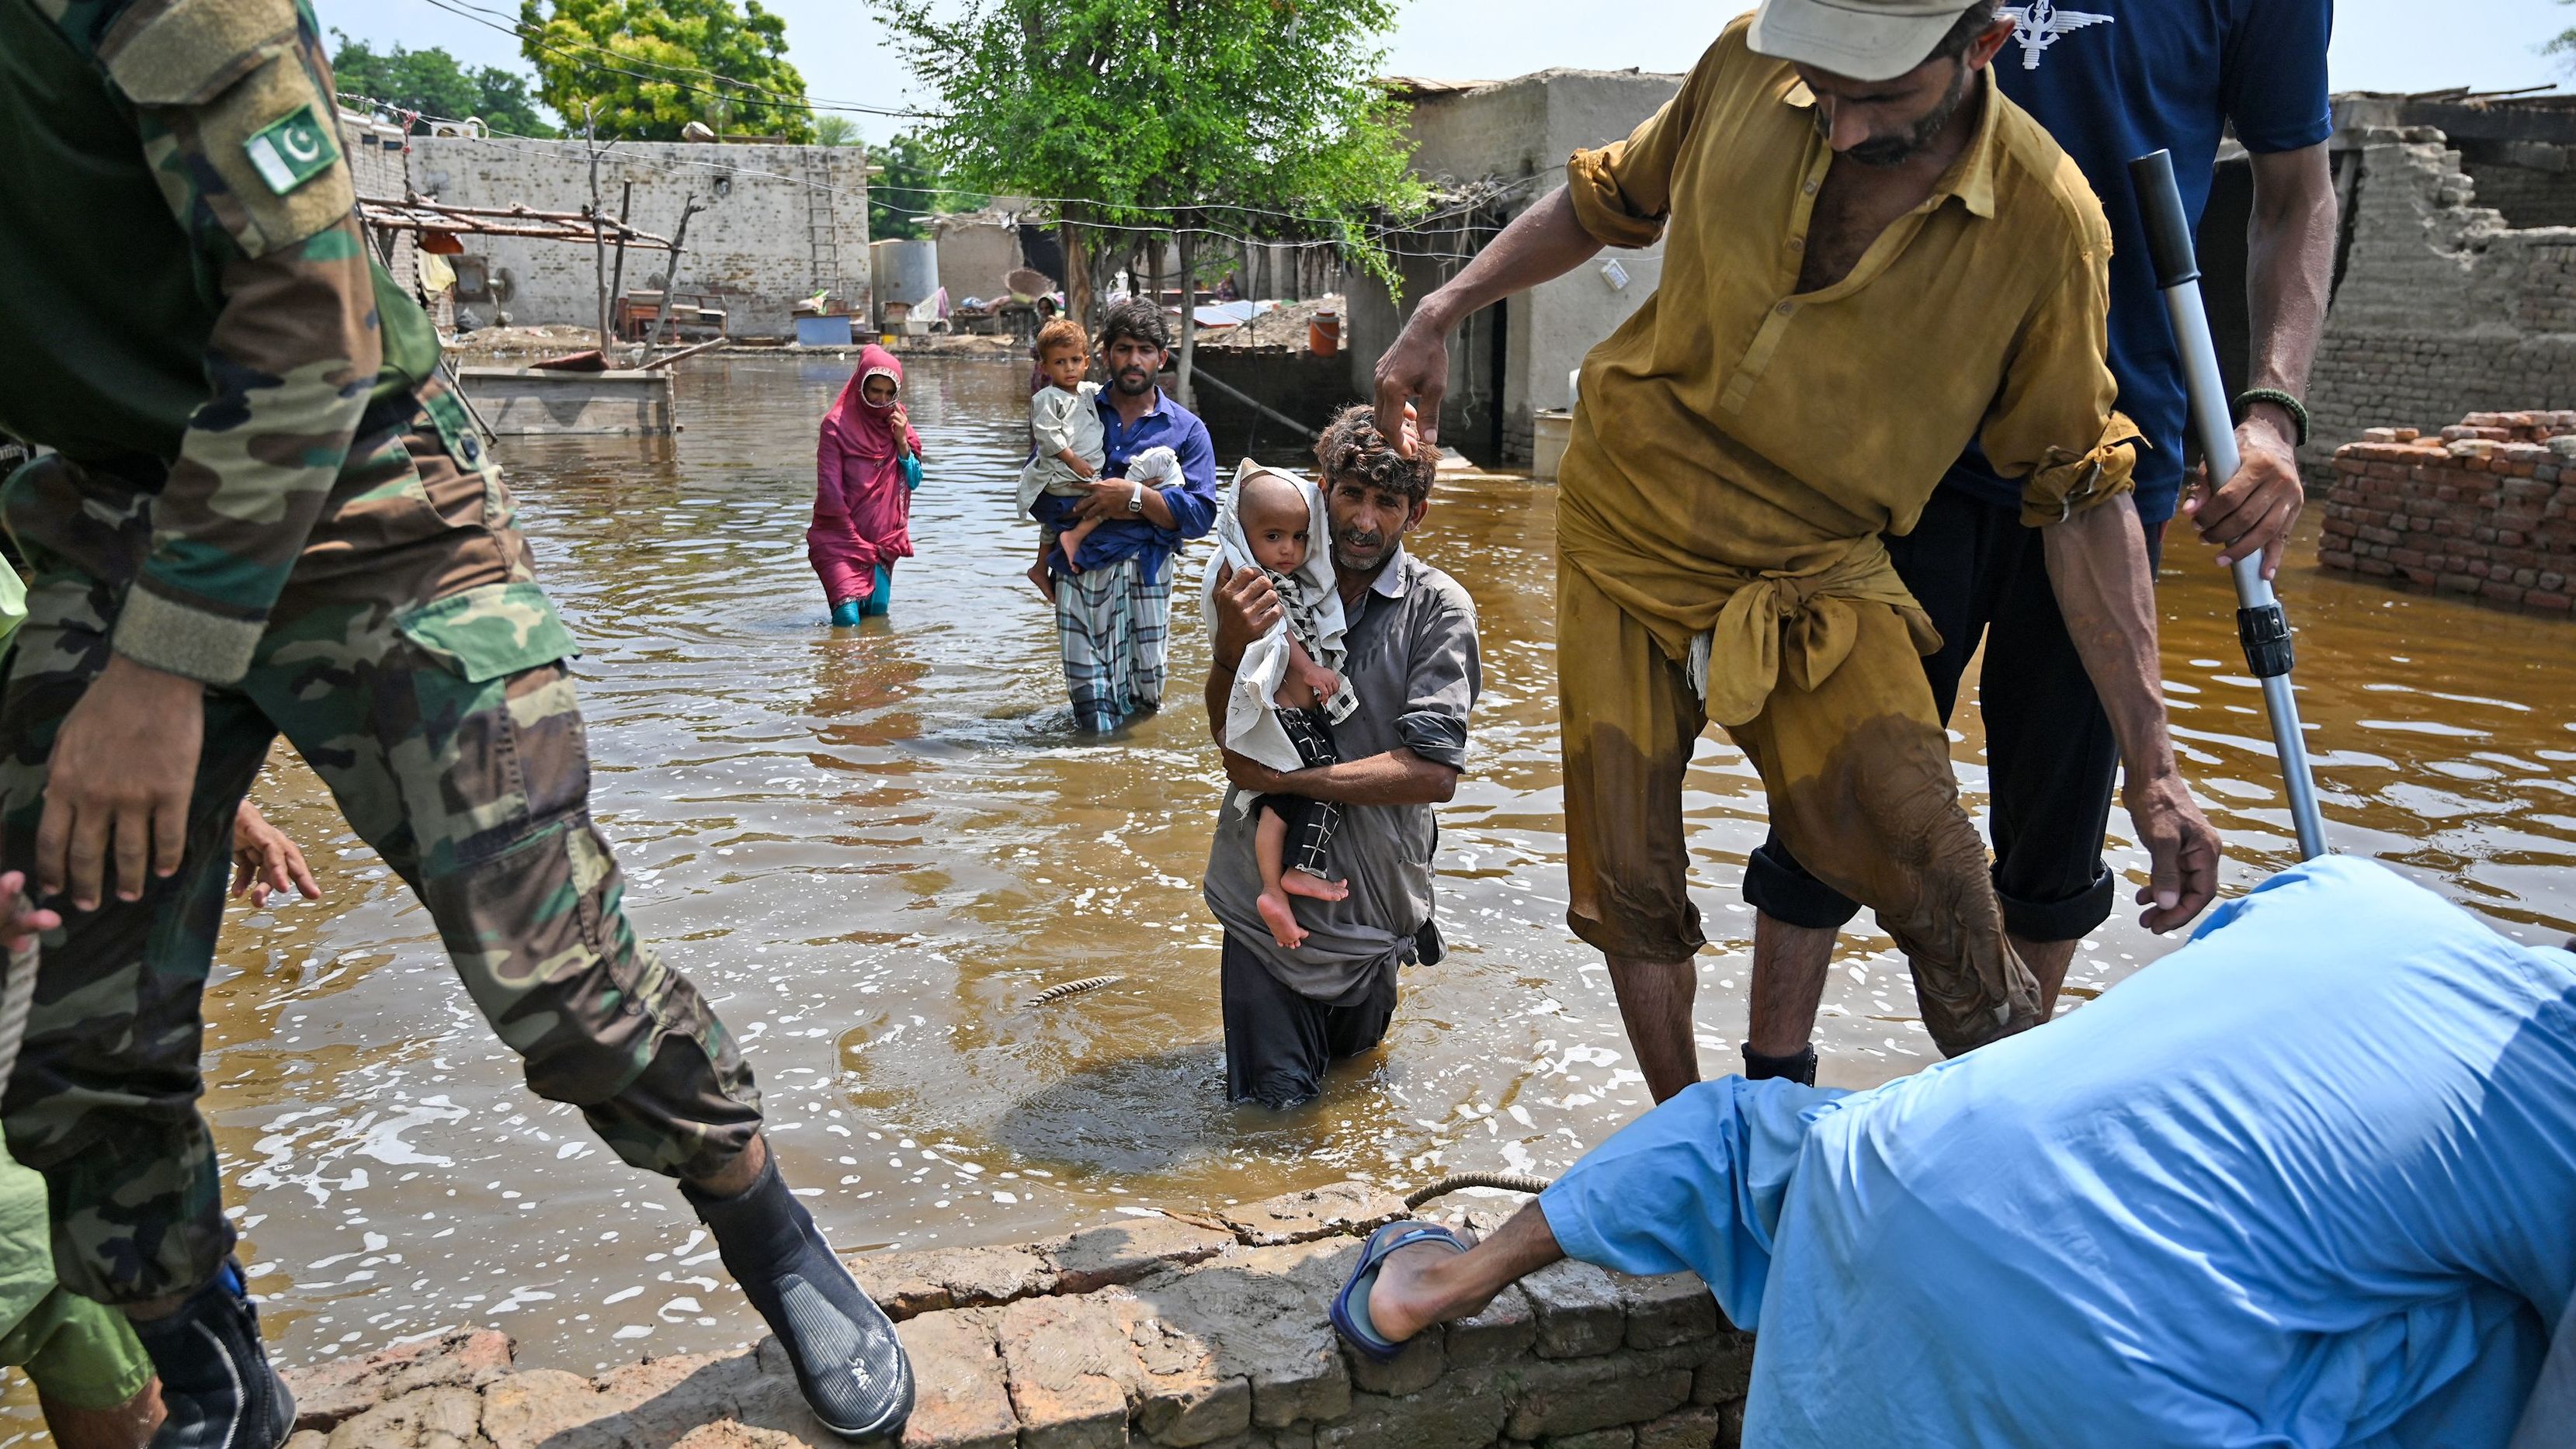 Pakistani naval personnel rescue flood-affected people in the country's Dadu district on Wednesday, September 7. <a href="https://www.cnn.com/2022/08/29/world/gallery/pakistan-flooding/index.html" target="_blank">Severe flooding</a> has killed more than 1,300 people in Pakistan since mid-June, officials said, and by the end of August more than a third of the country was underwater, according to satellite images from the European Space Agency.